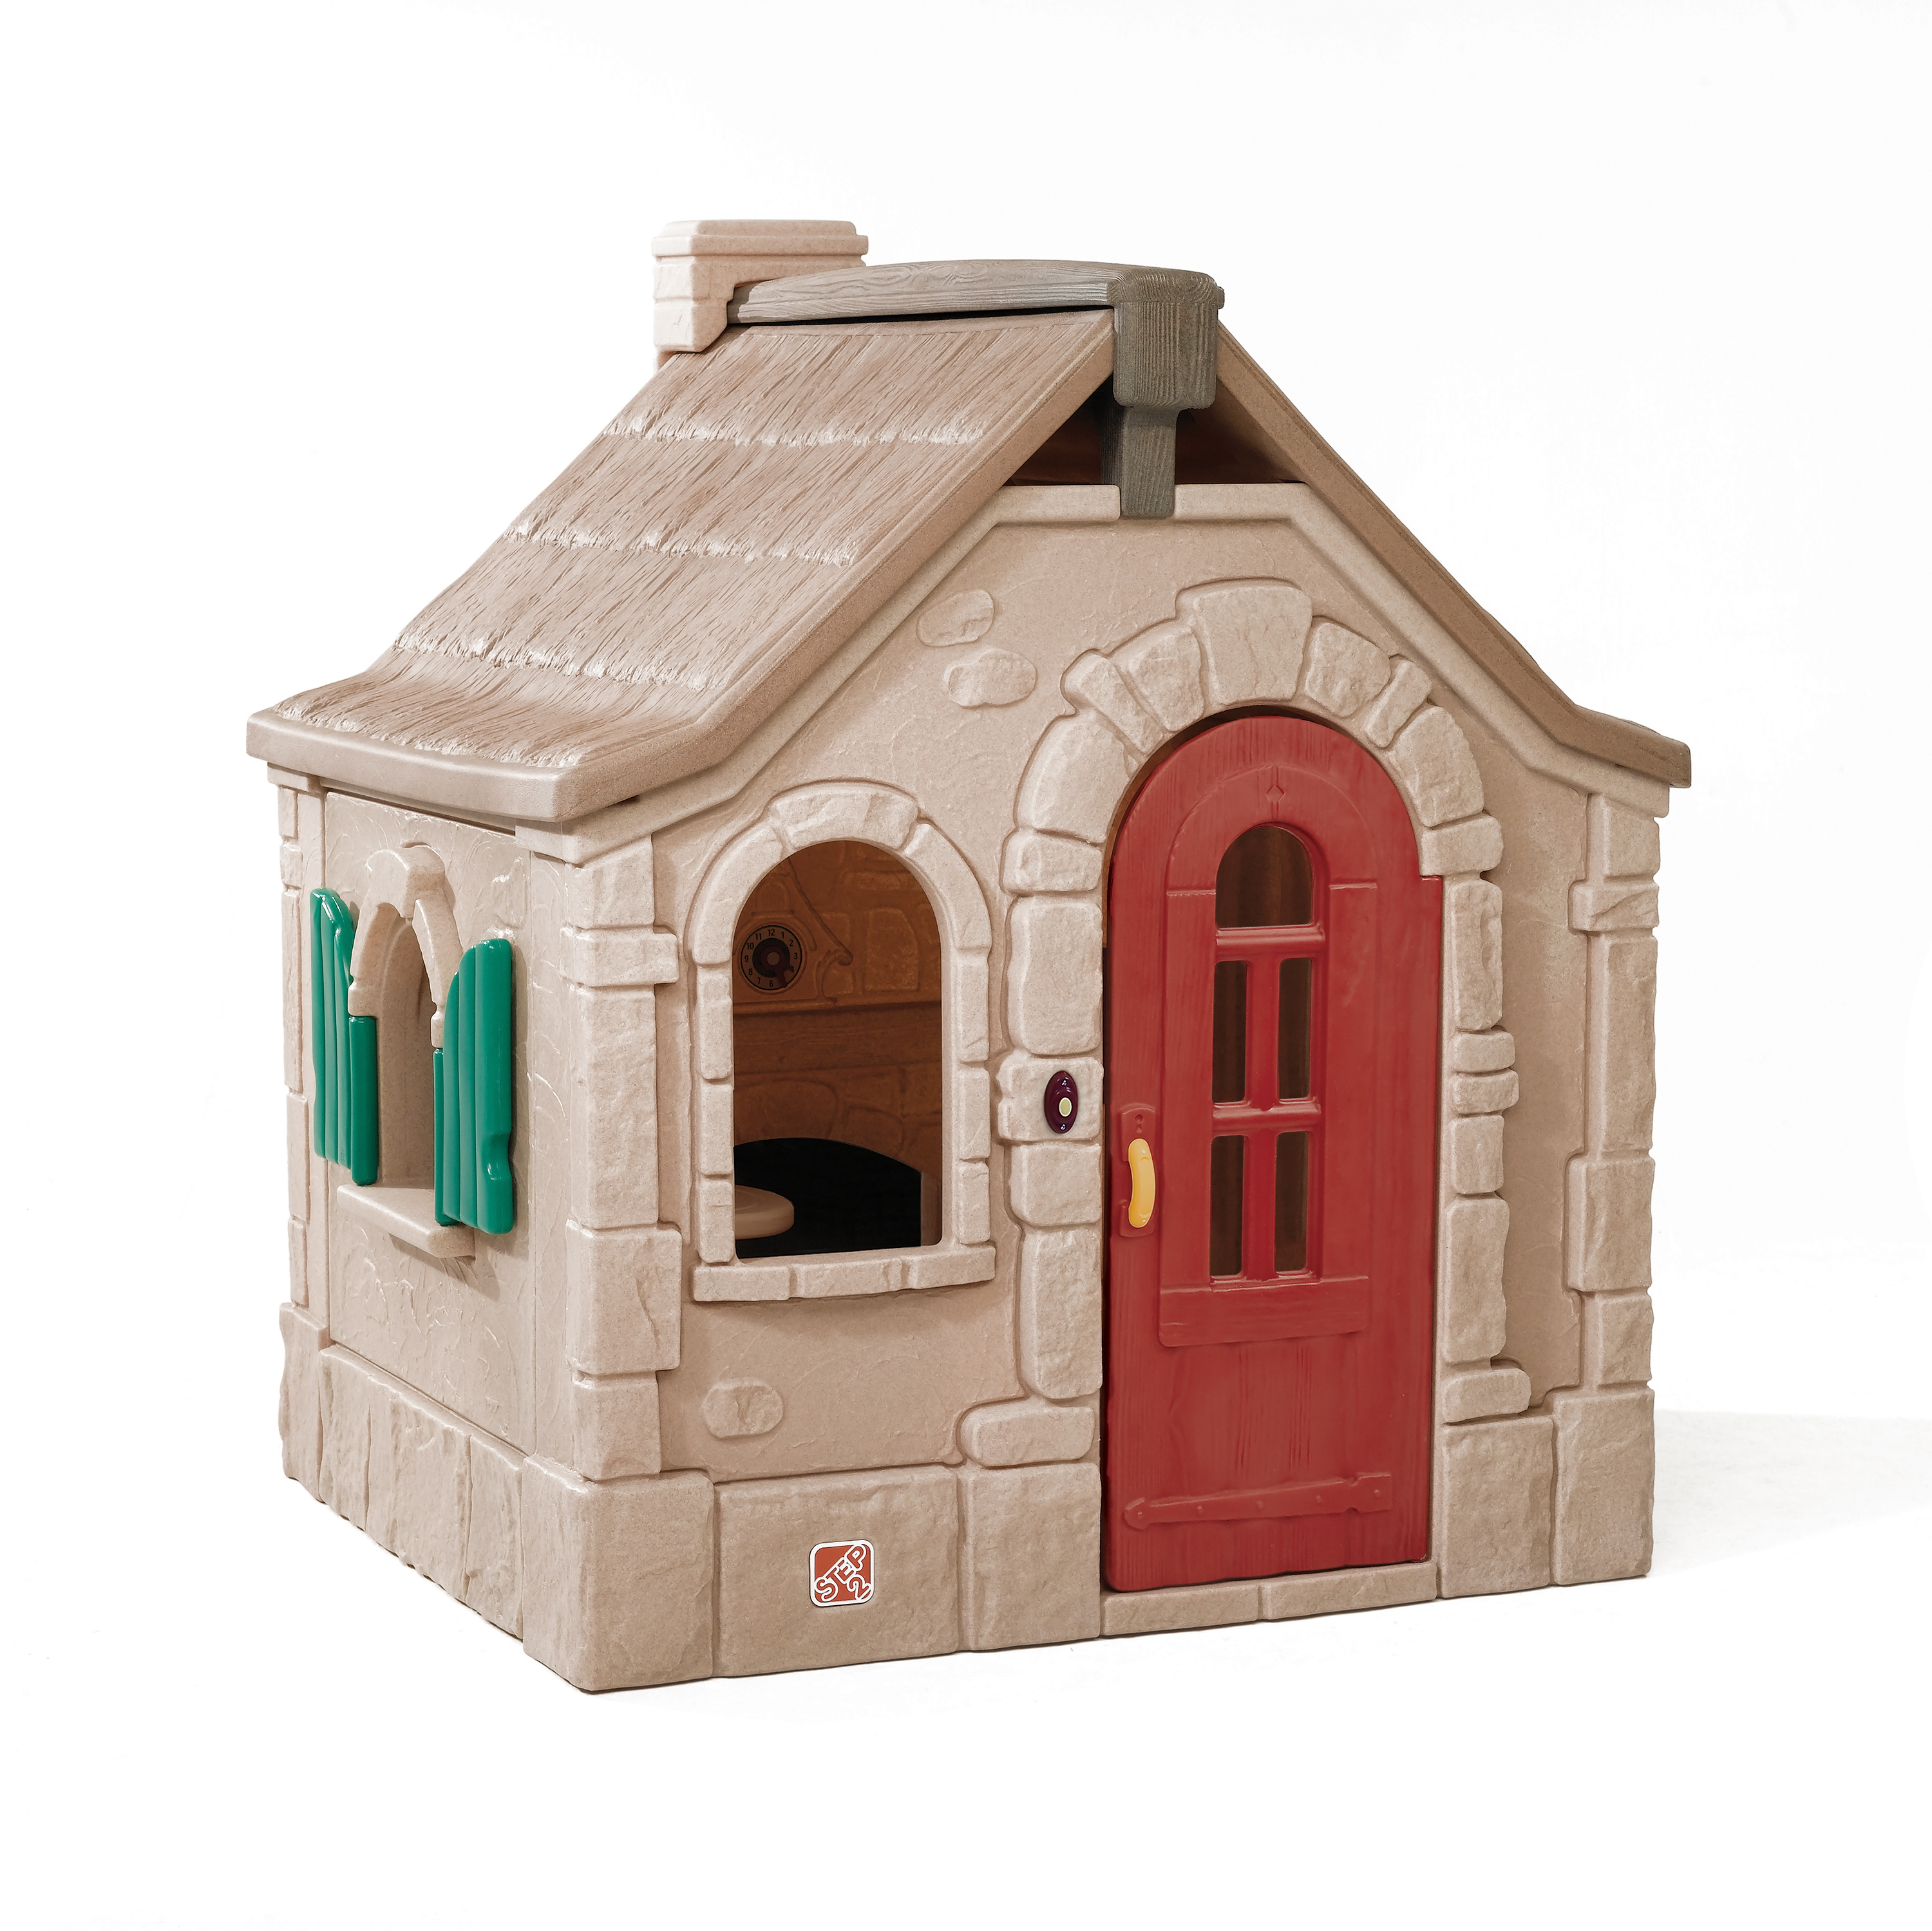 Step2 Naturally Playful Storybook Brown Cottage Playhouse Plastic Kids Outdoor Toy - image 1 of 5